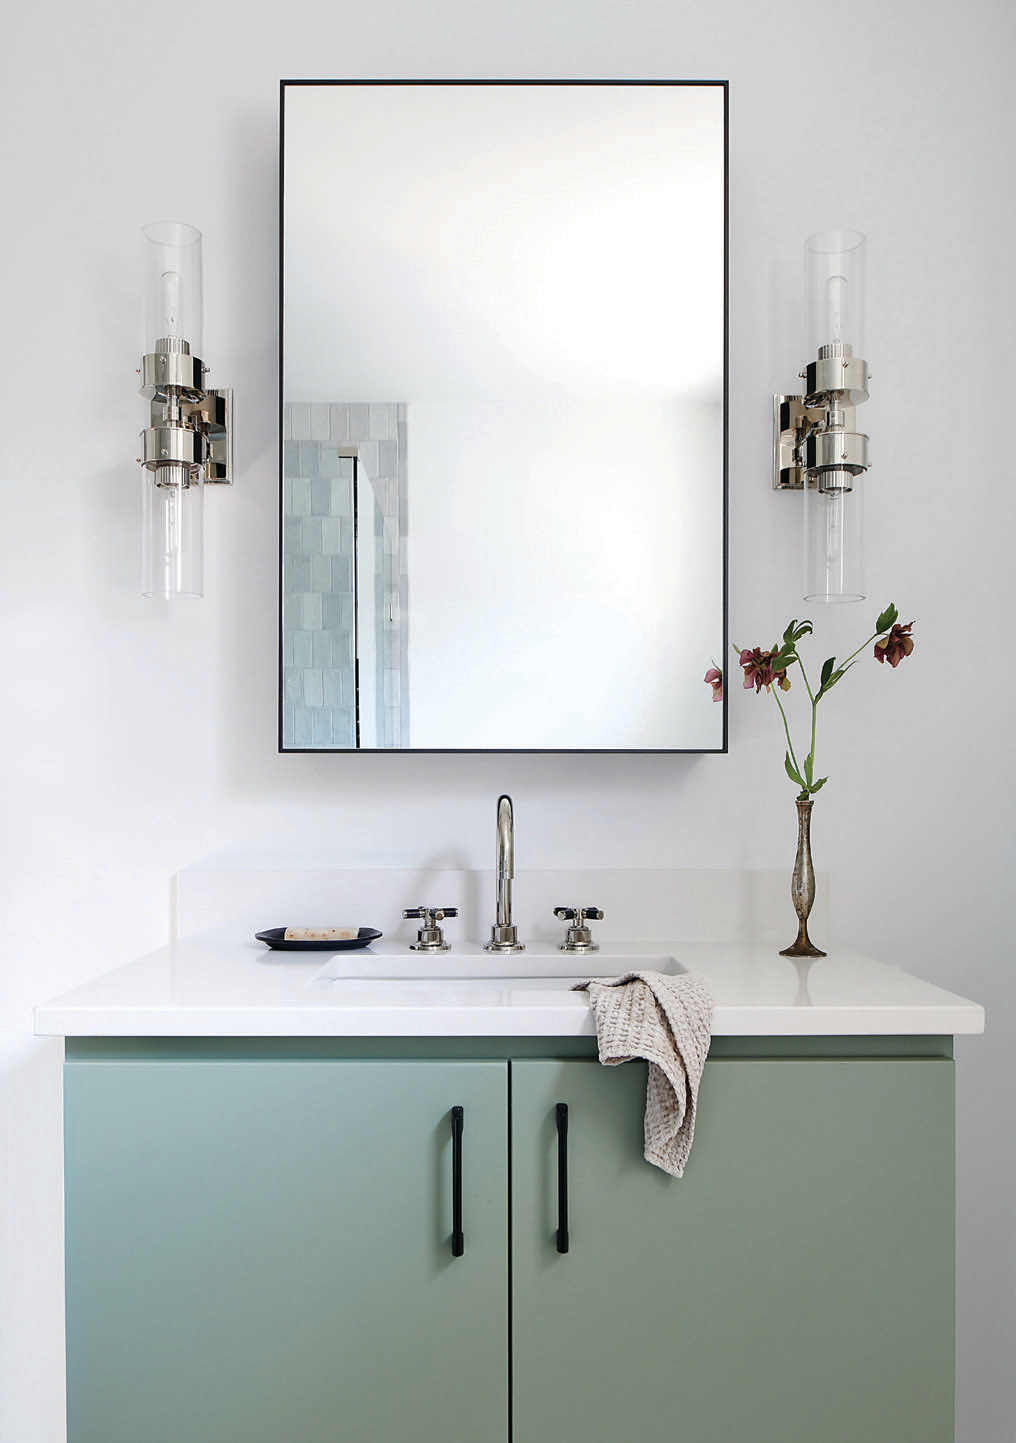 The guest bathroom’s sage-hued midcentury-styled vanity adds a wash of subtle color. The couple’s son, who often visits, weighed in on the design of this bathroom.